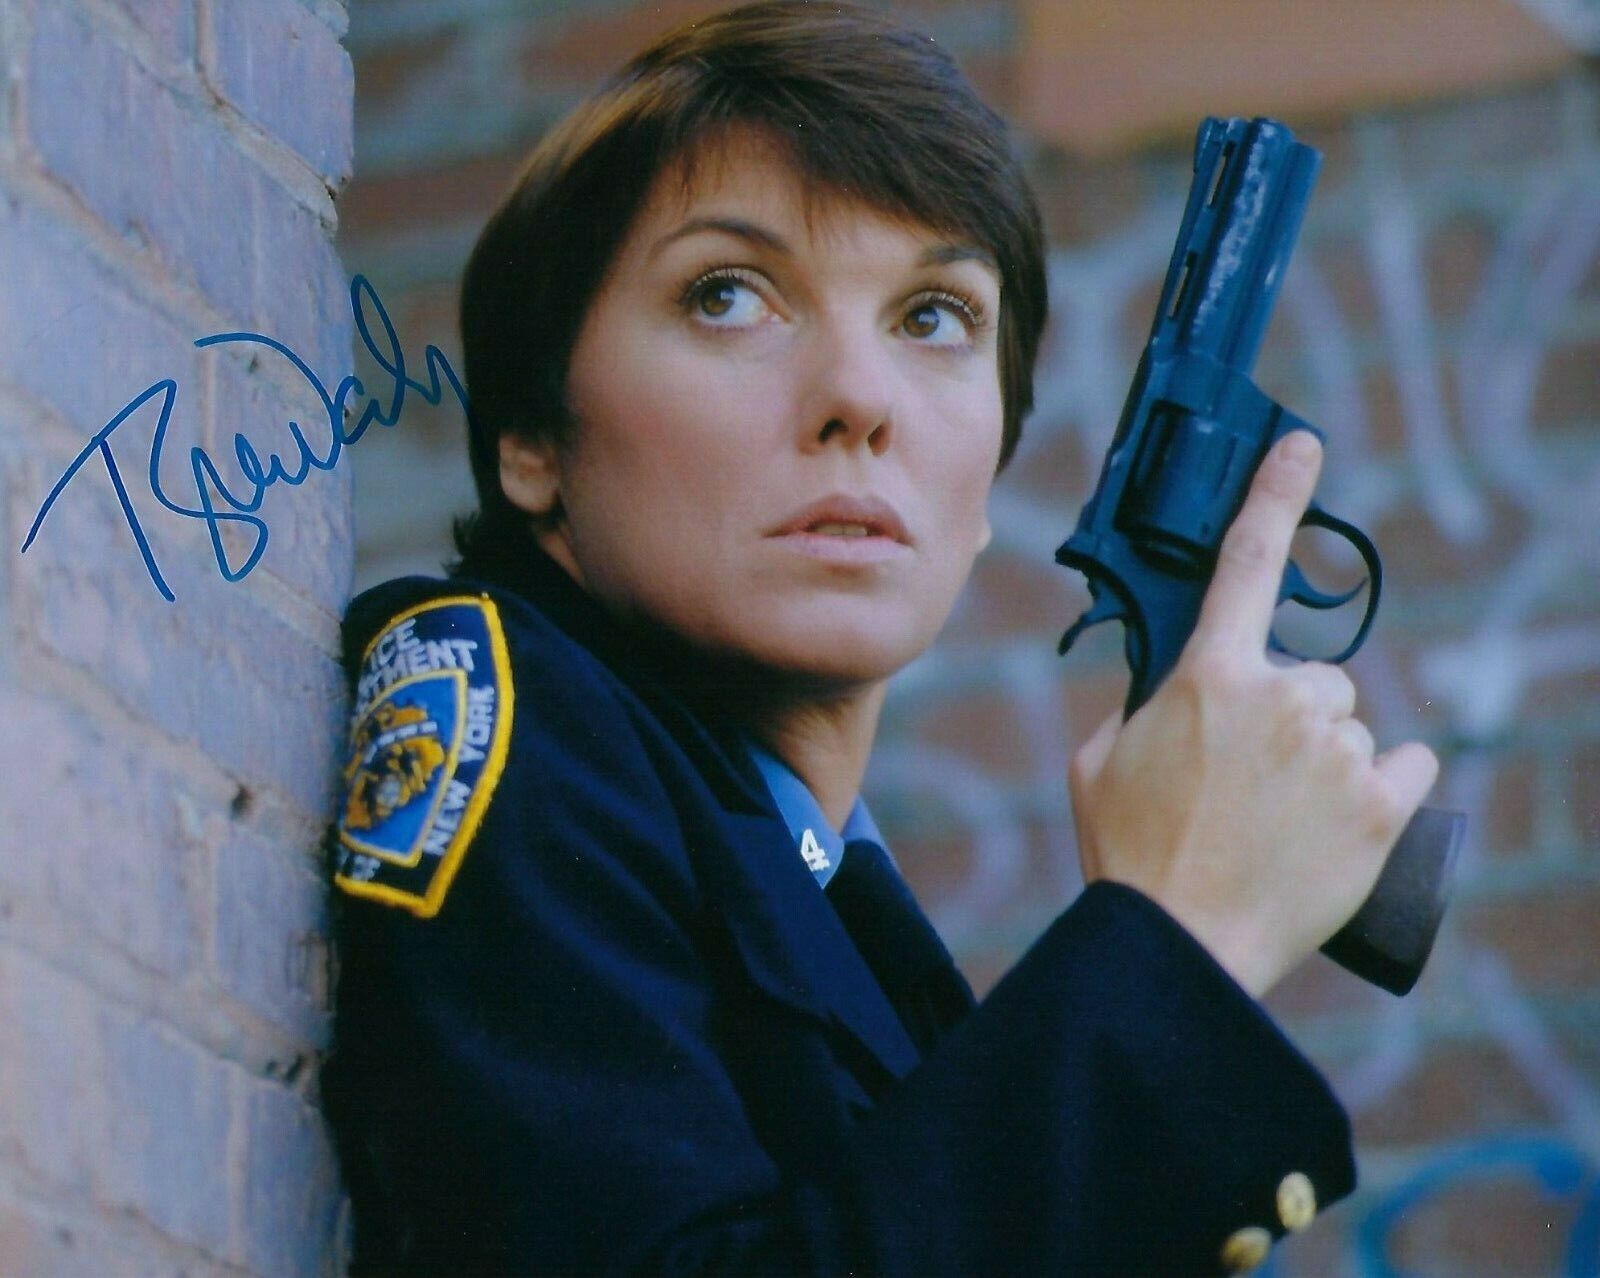 GFA Cagney & Lacey Show * TYNE DALY * Signed Autographed 8x10 Photo Poster painting T1 COA